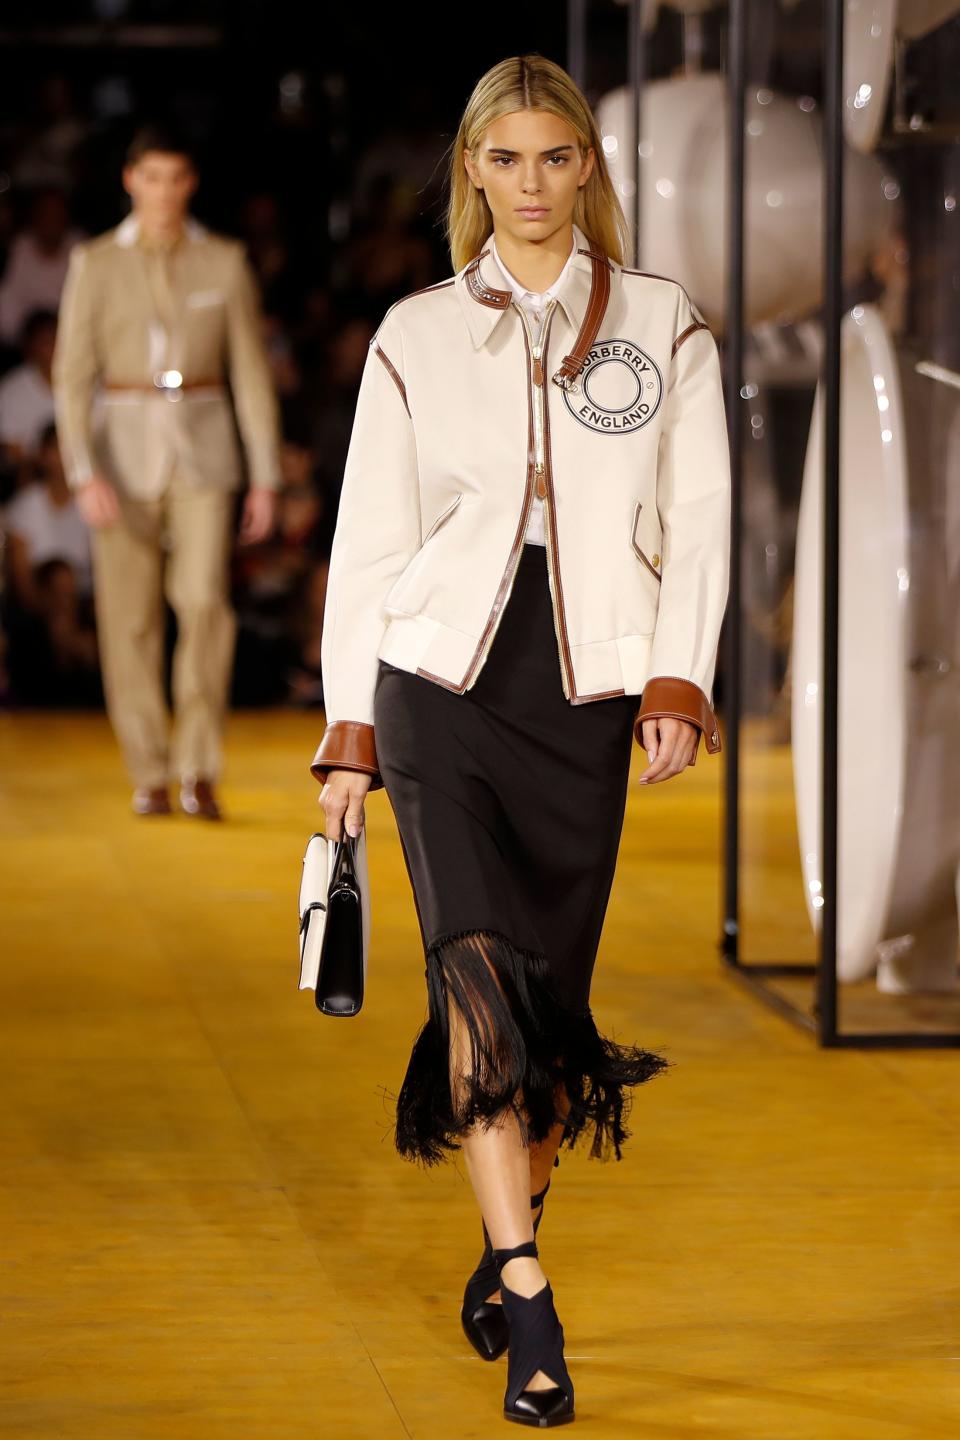 Kendall Jenner made a return to the runway with new blonde locks at Burberry's spring/summer 2020 show. [Photo: Getty Images]